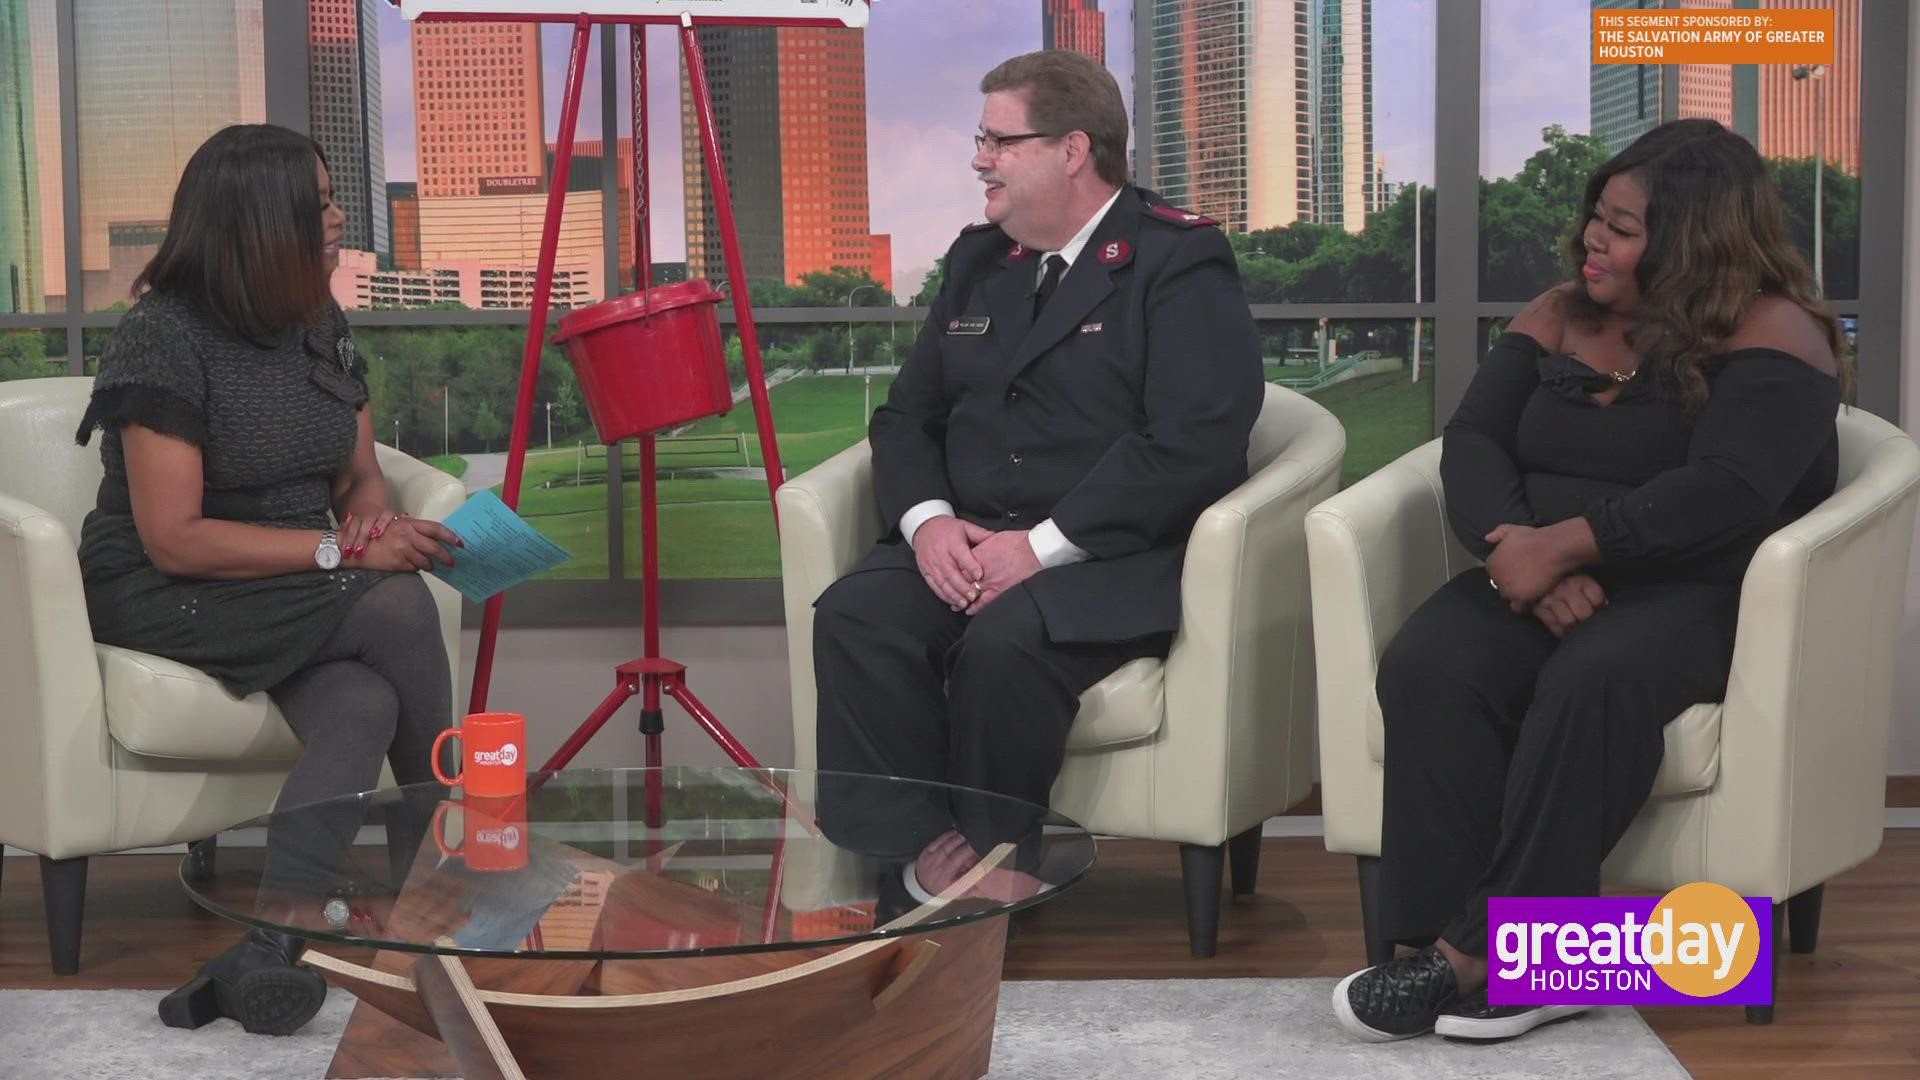 We learn more about The Salvation Army, their Angel Tree Program and ways you can support this holiday season.